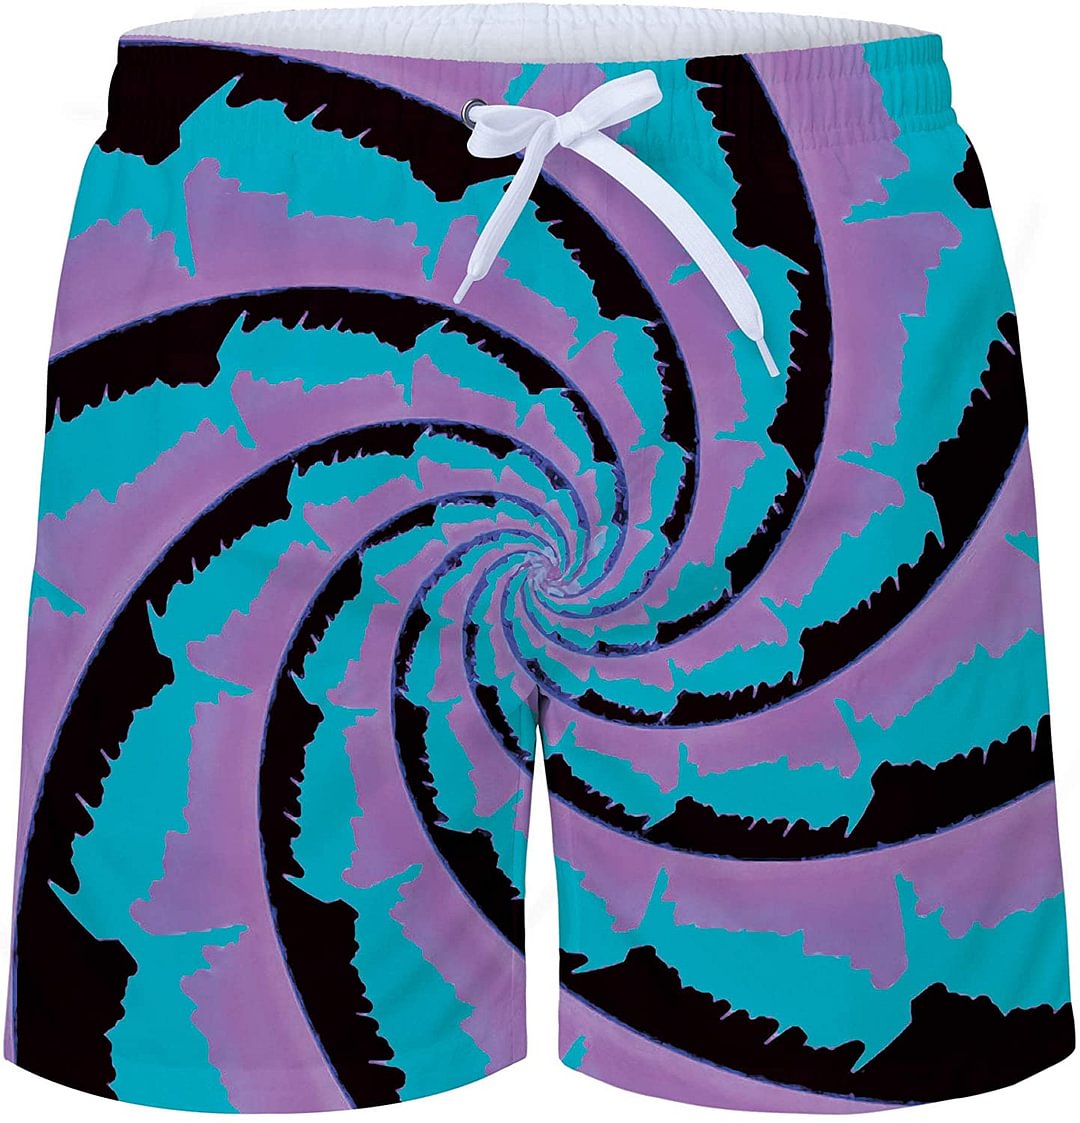 Mens Swimming Trunks 3D Graphic Quick Dry Surfing Beach Shorts Swimsuit with Mesh Lining